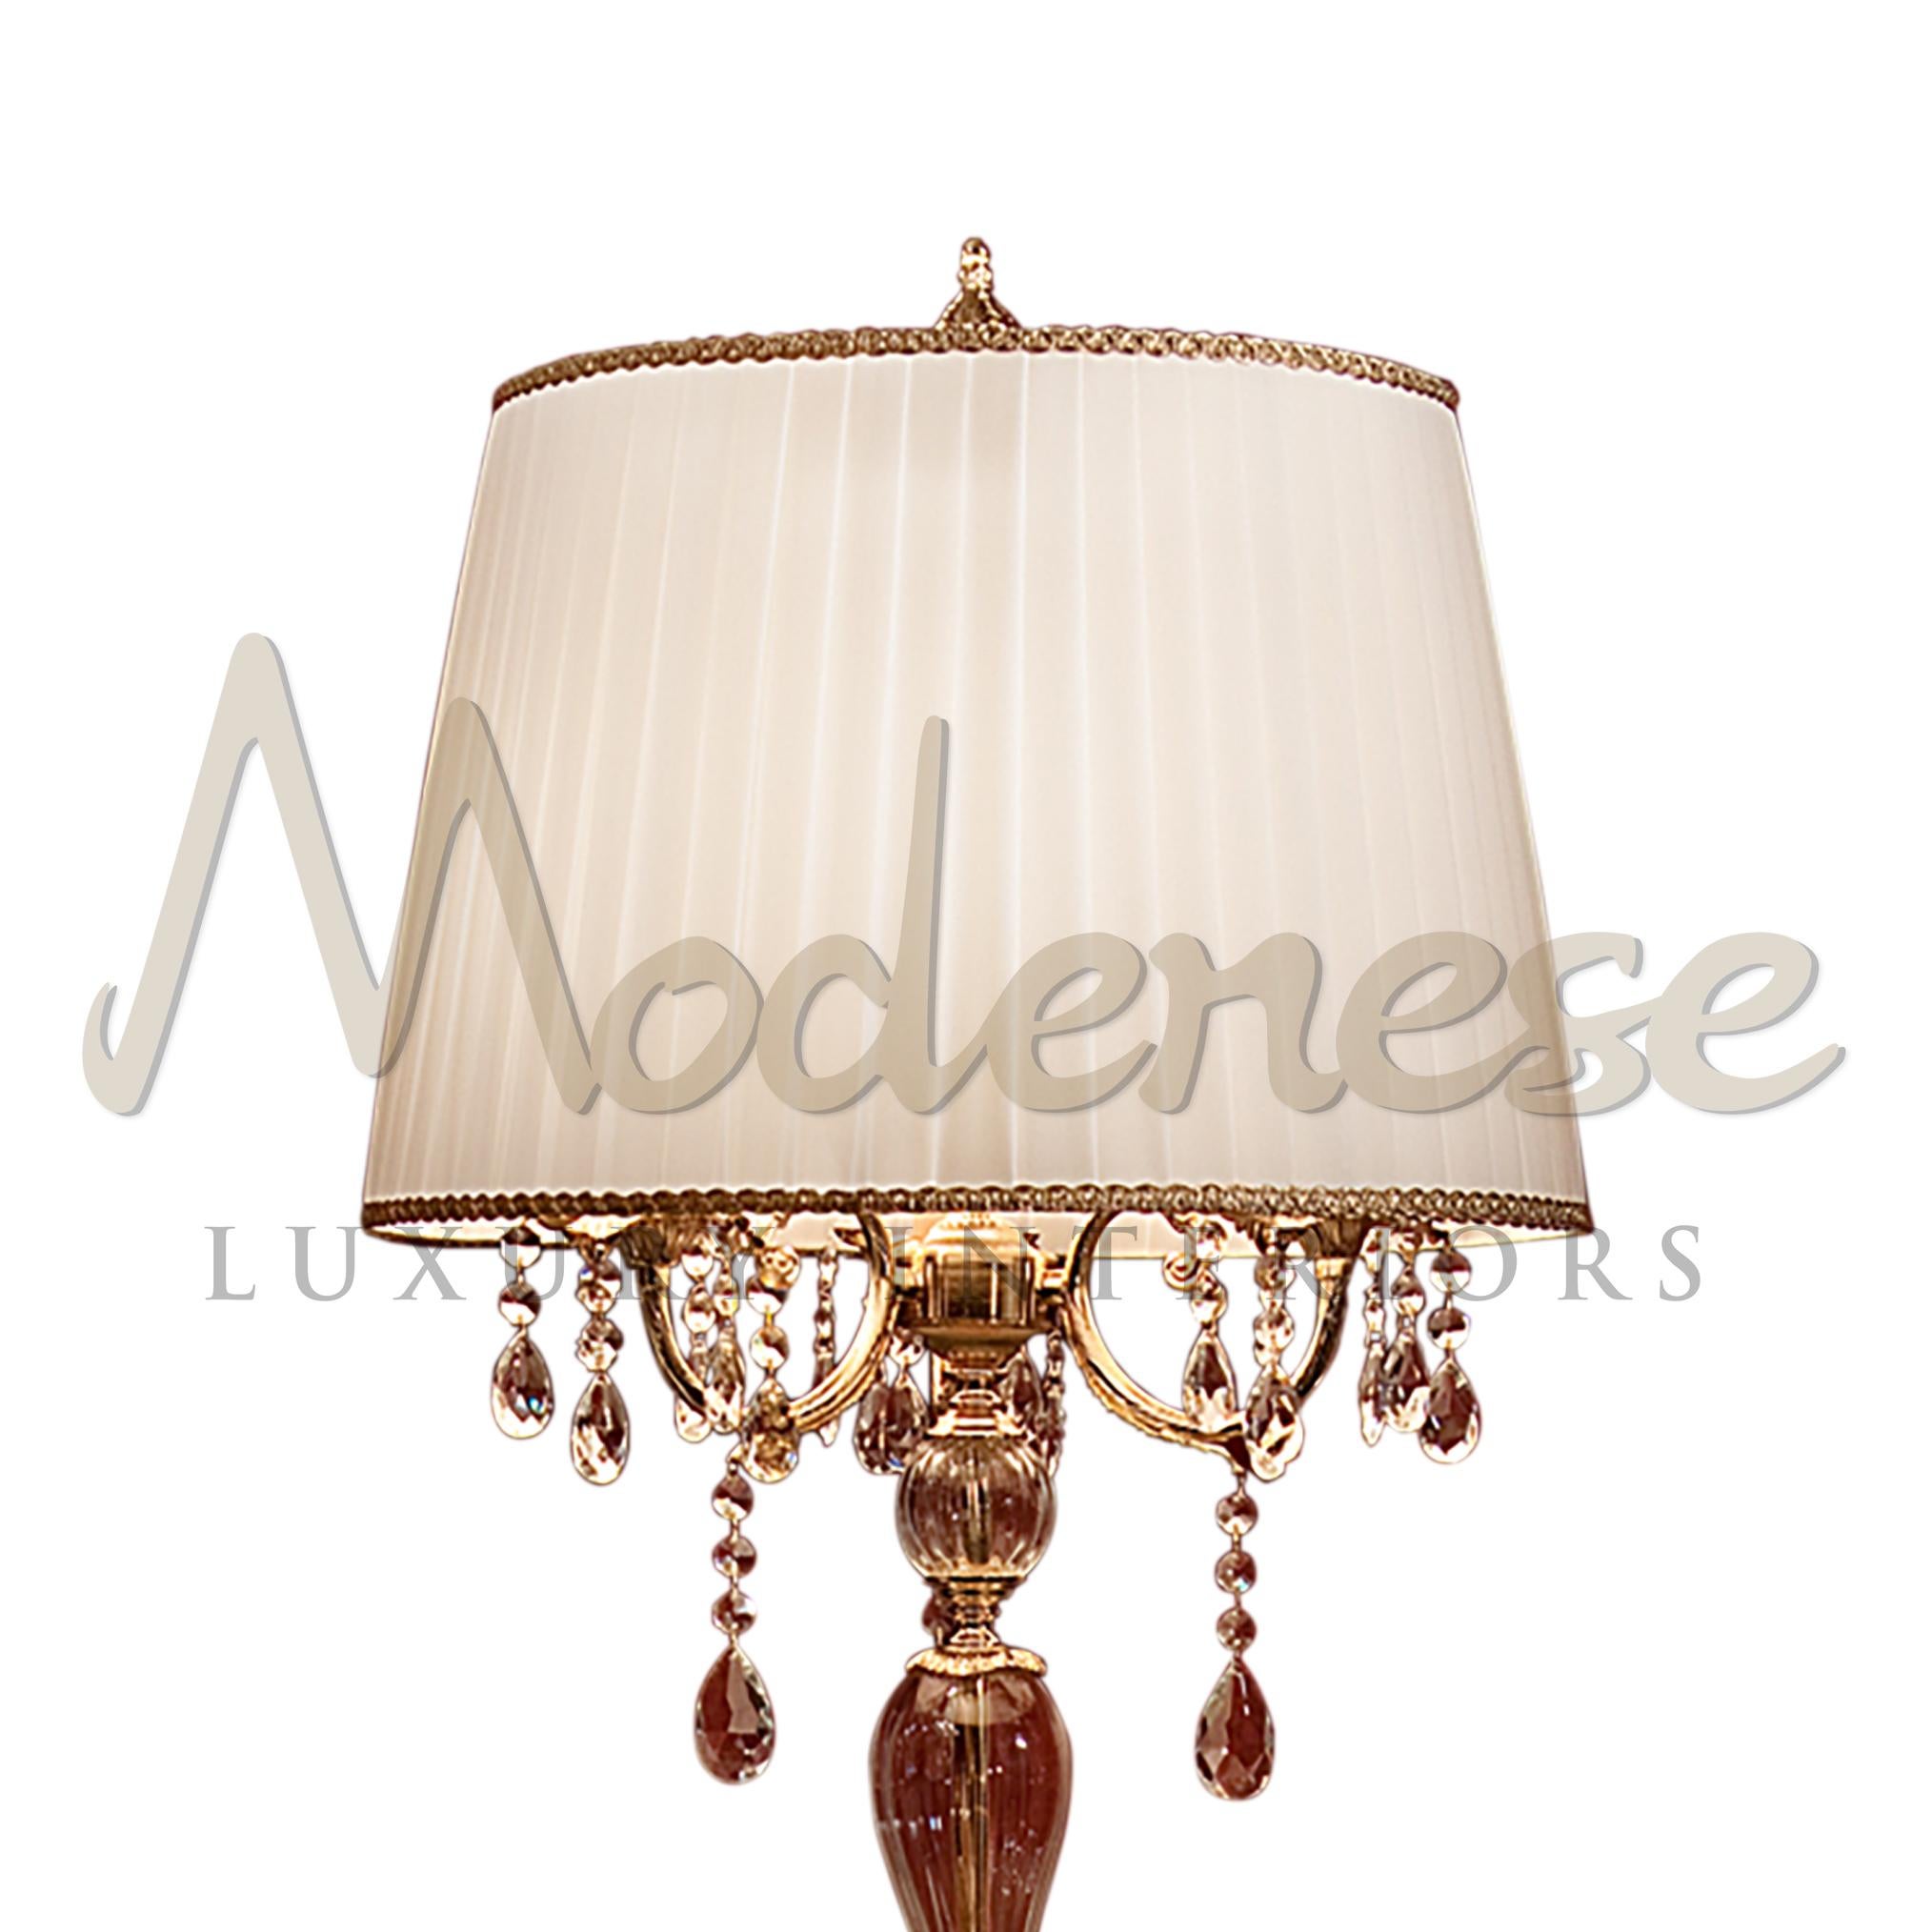 Victorian Royal Palace 24kt Antique Gold Plated 3-Lights Table Lamp with Crystal Pendants For Sale